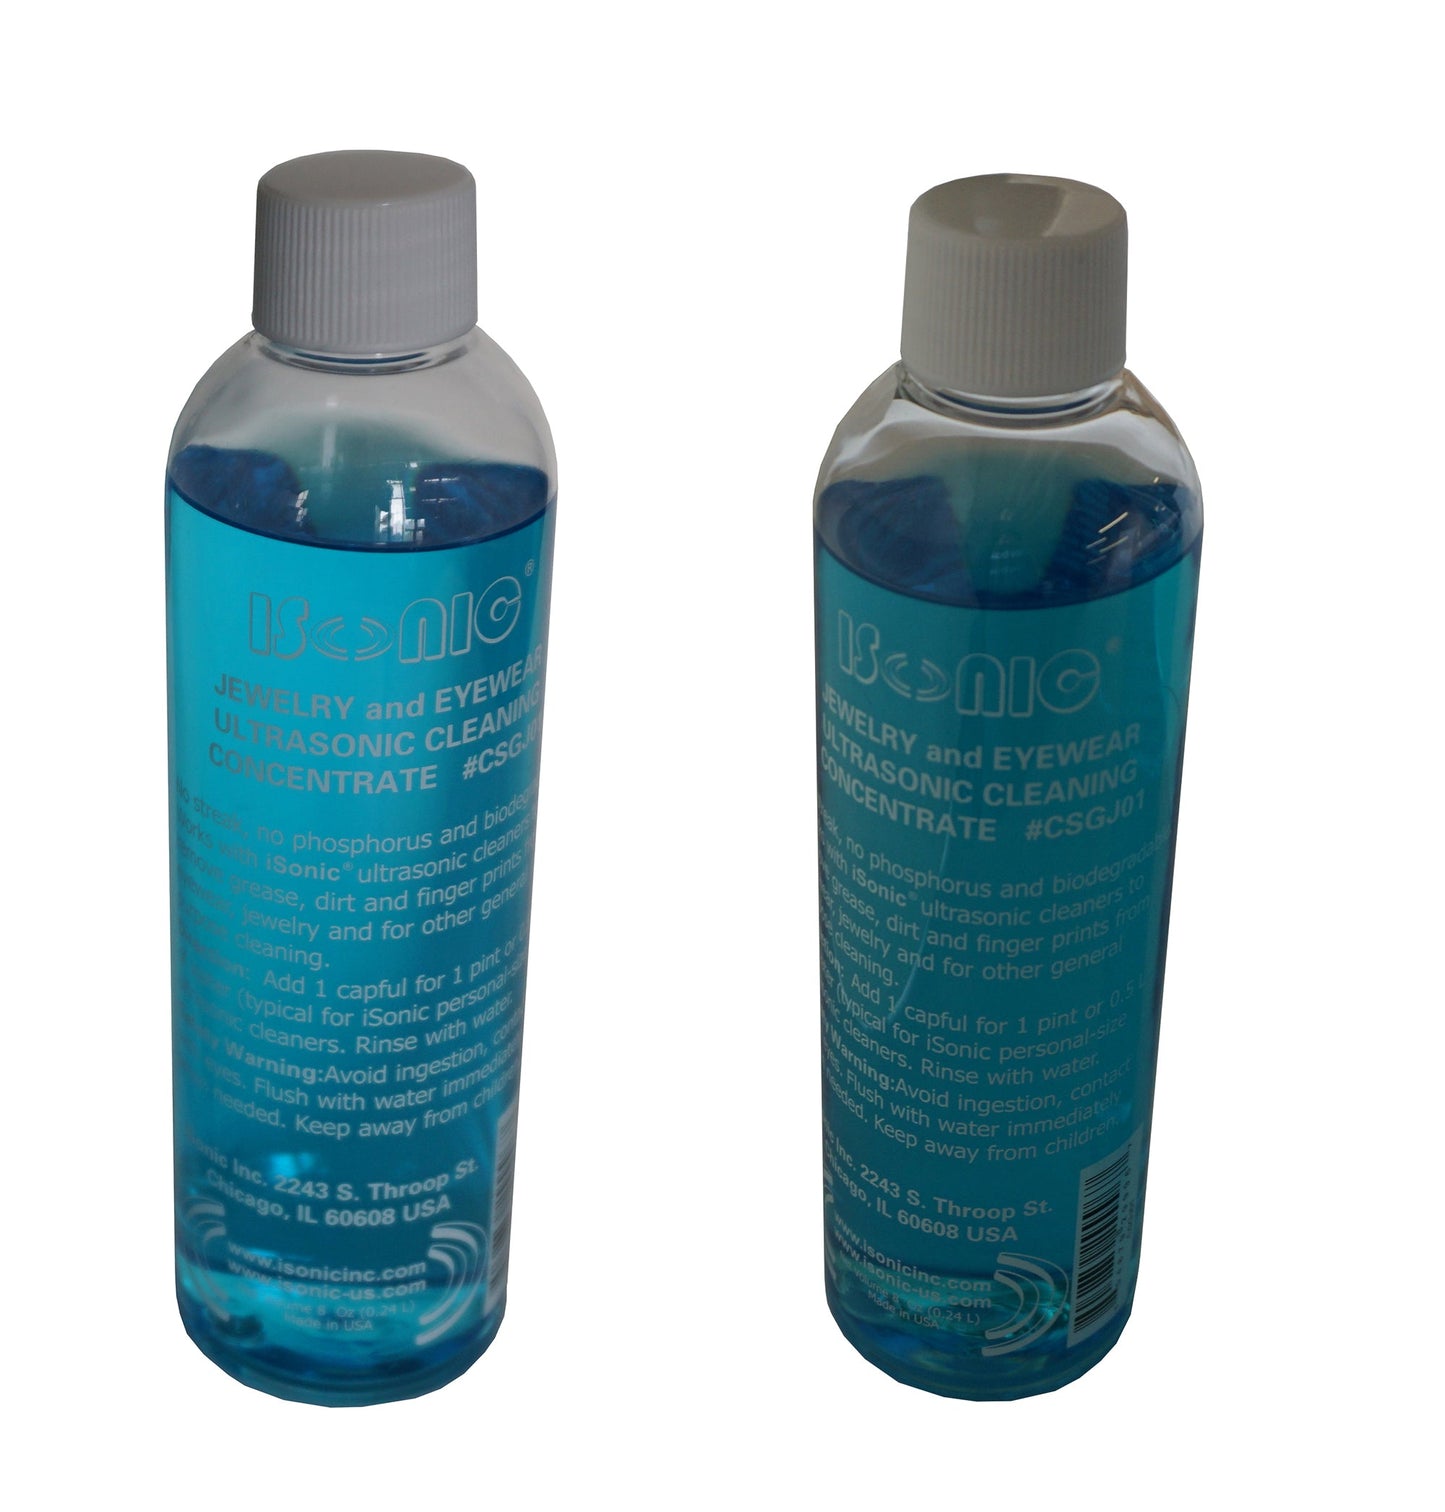 CSGJ01x2 Promo | iSonic® Jewelry and Eyewear Cleaning Solution Concentrate - 2 x 8oz Bottles, Promotional Price!